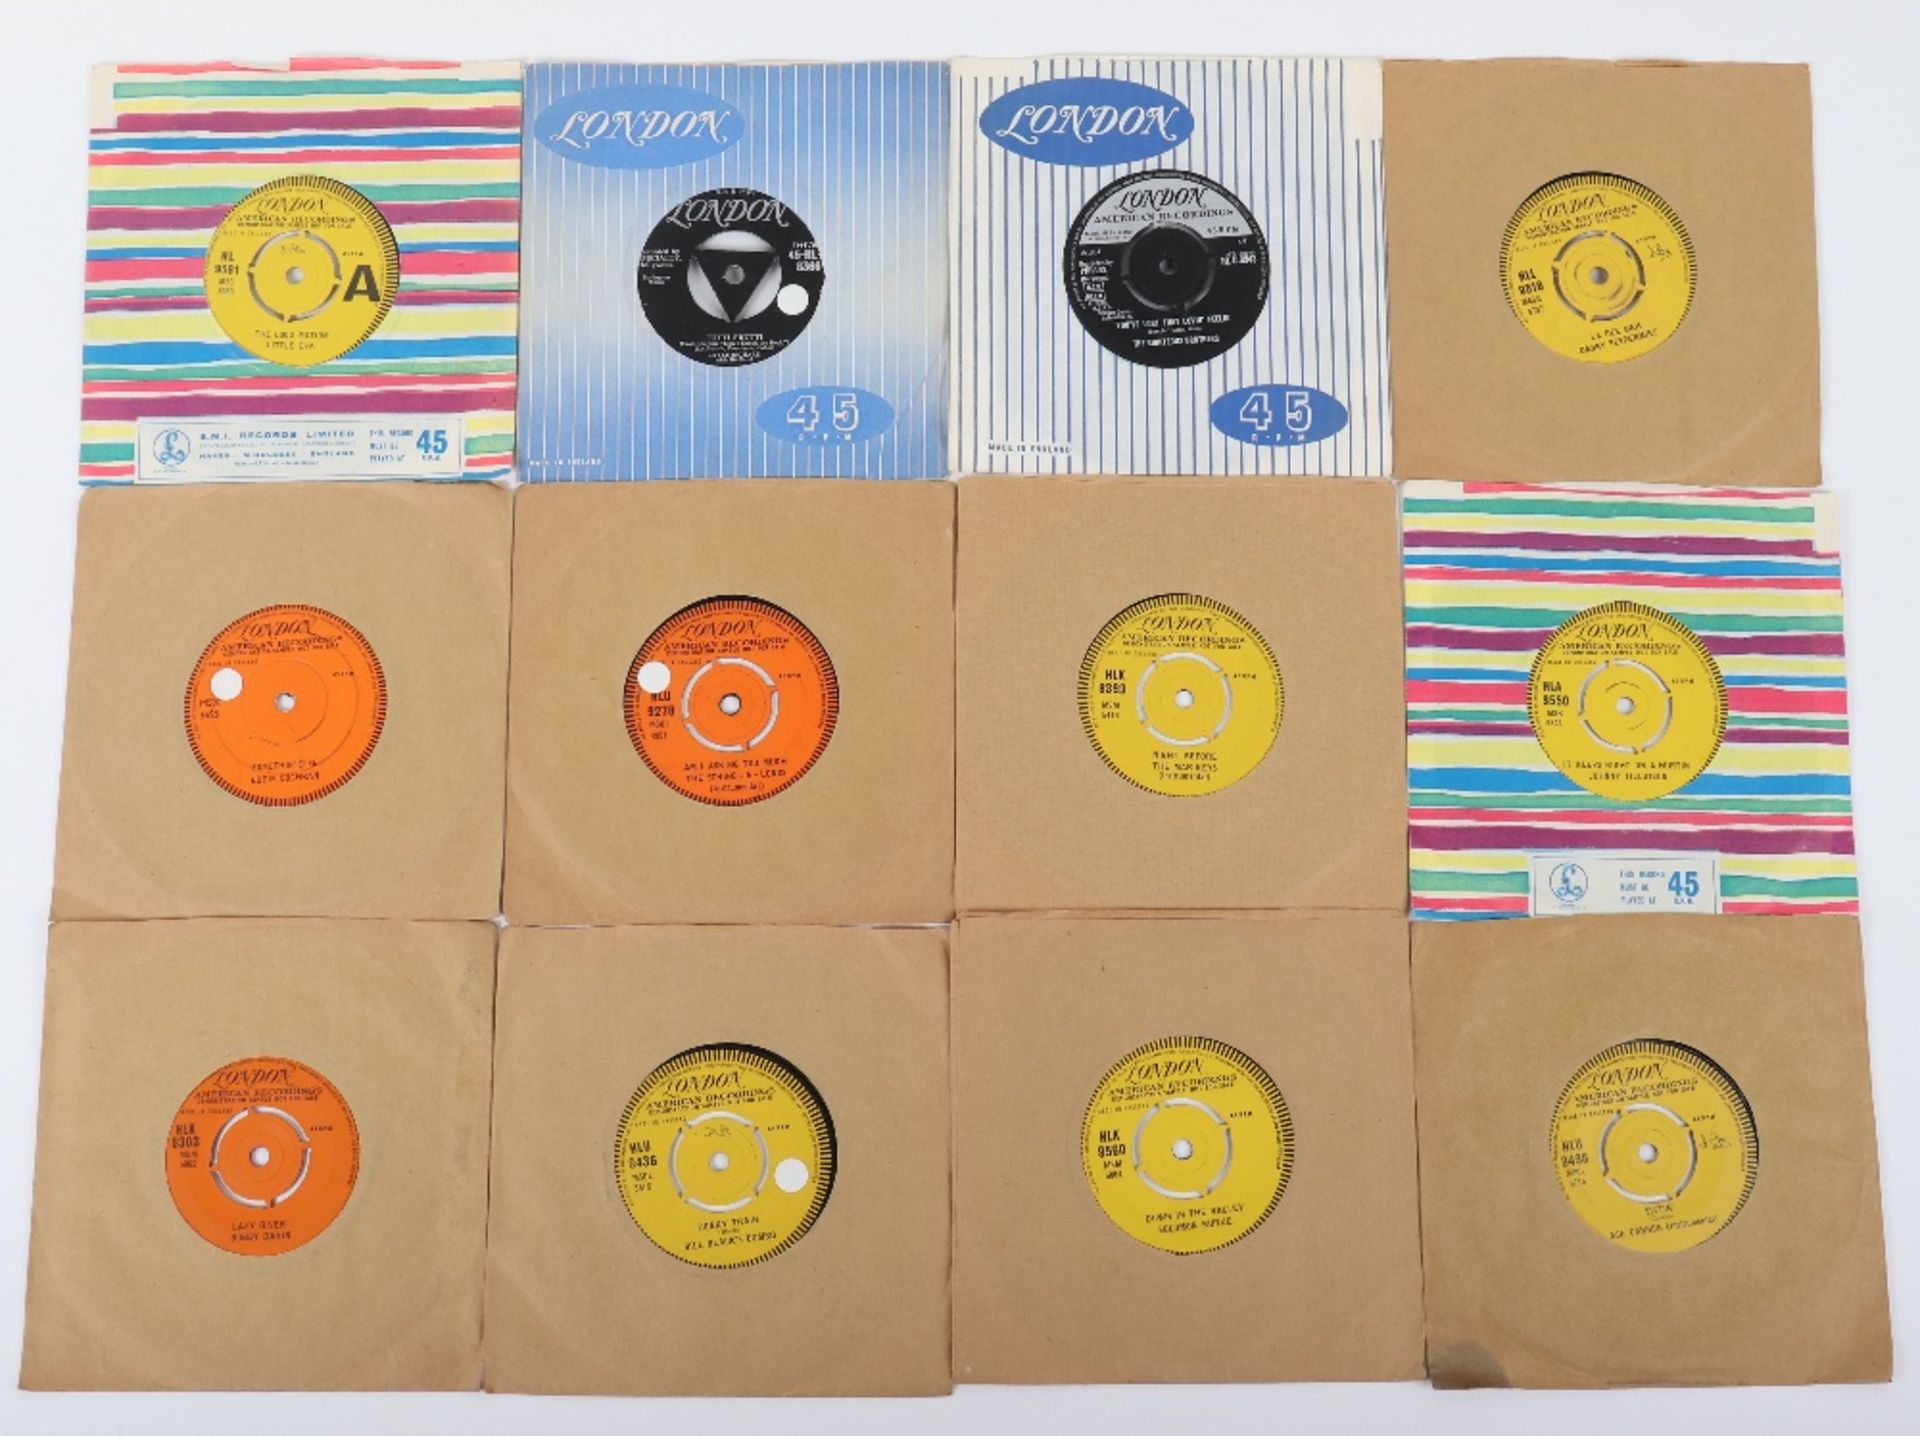 Forty Two London labels 7” Vinyl Singles - Image 2 of 4